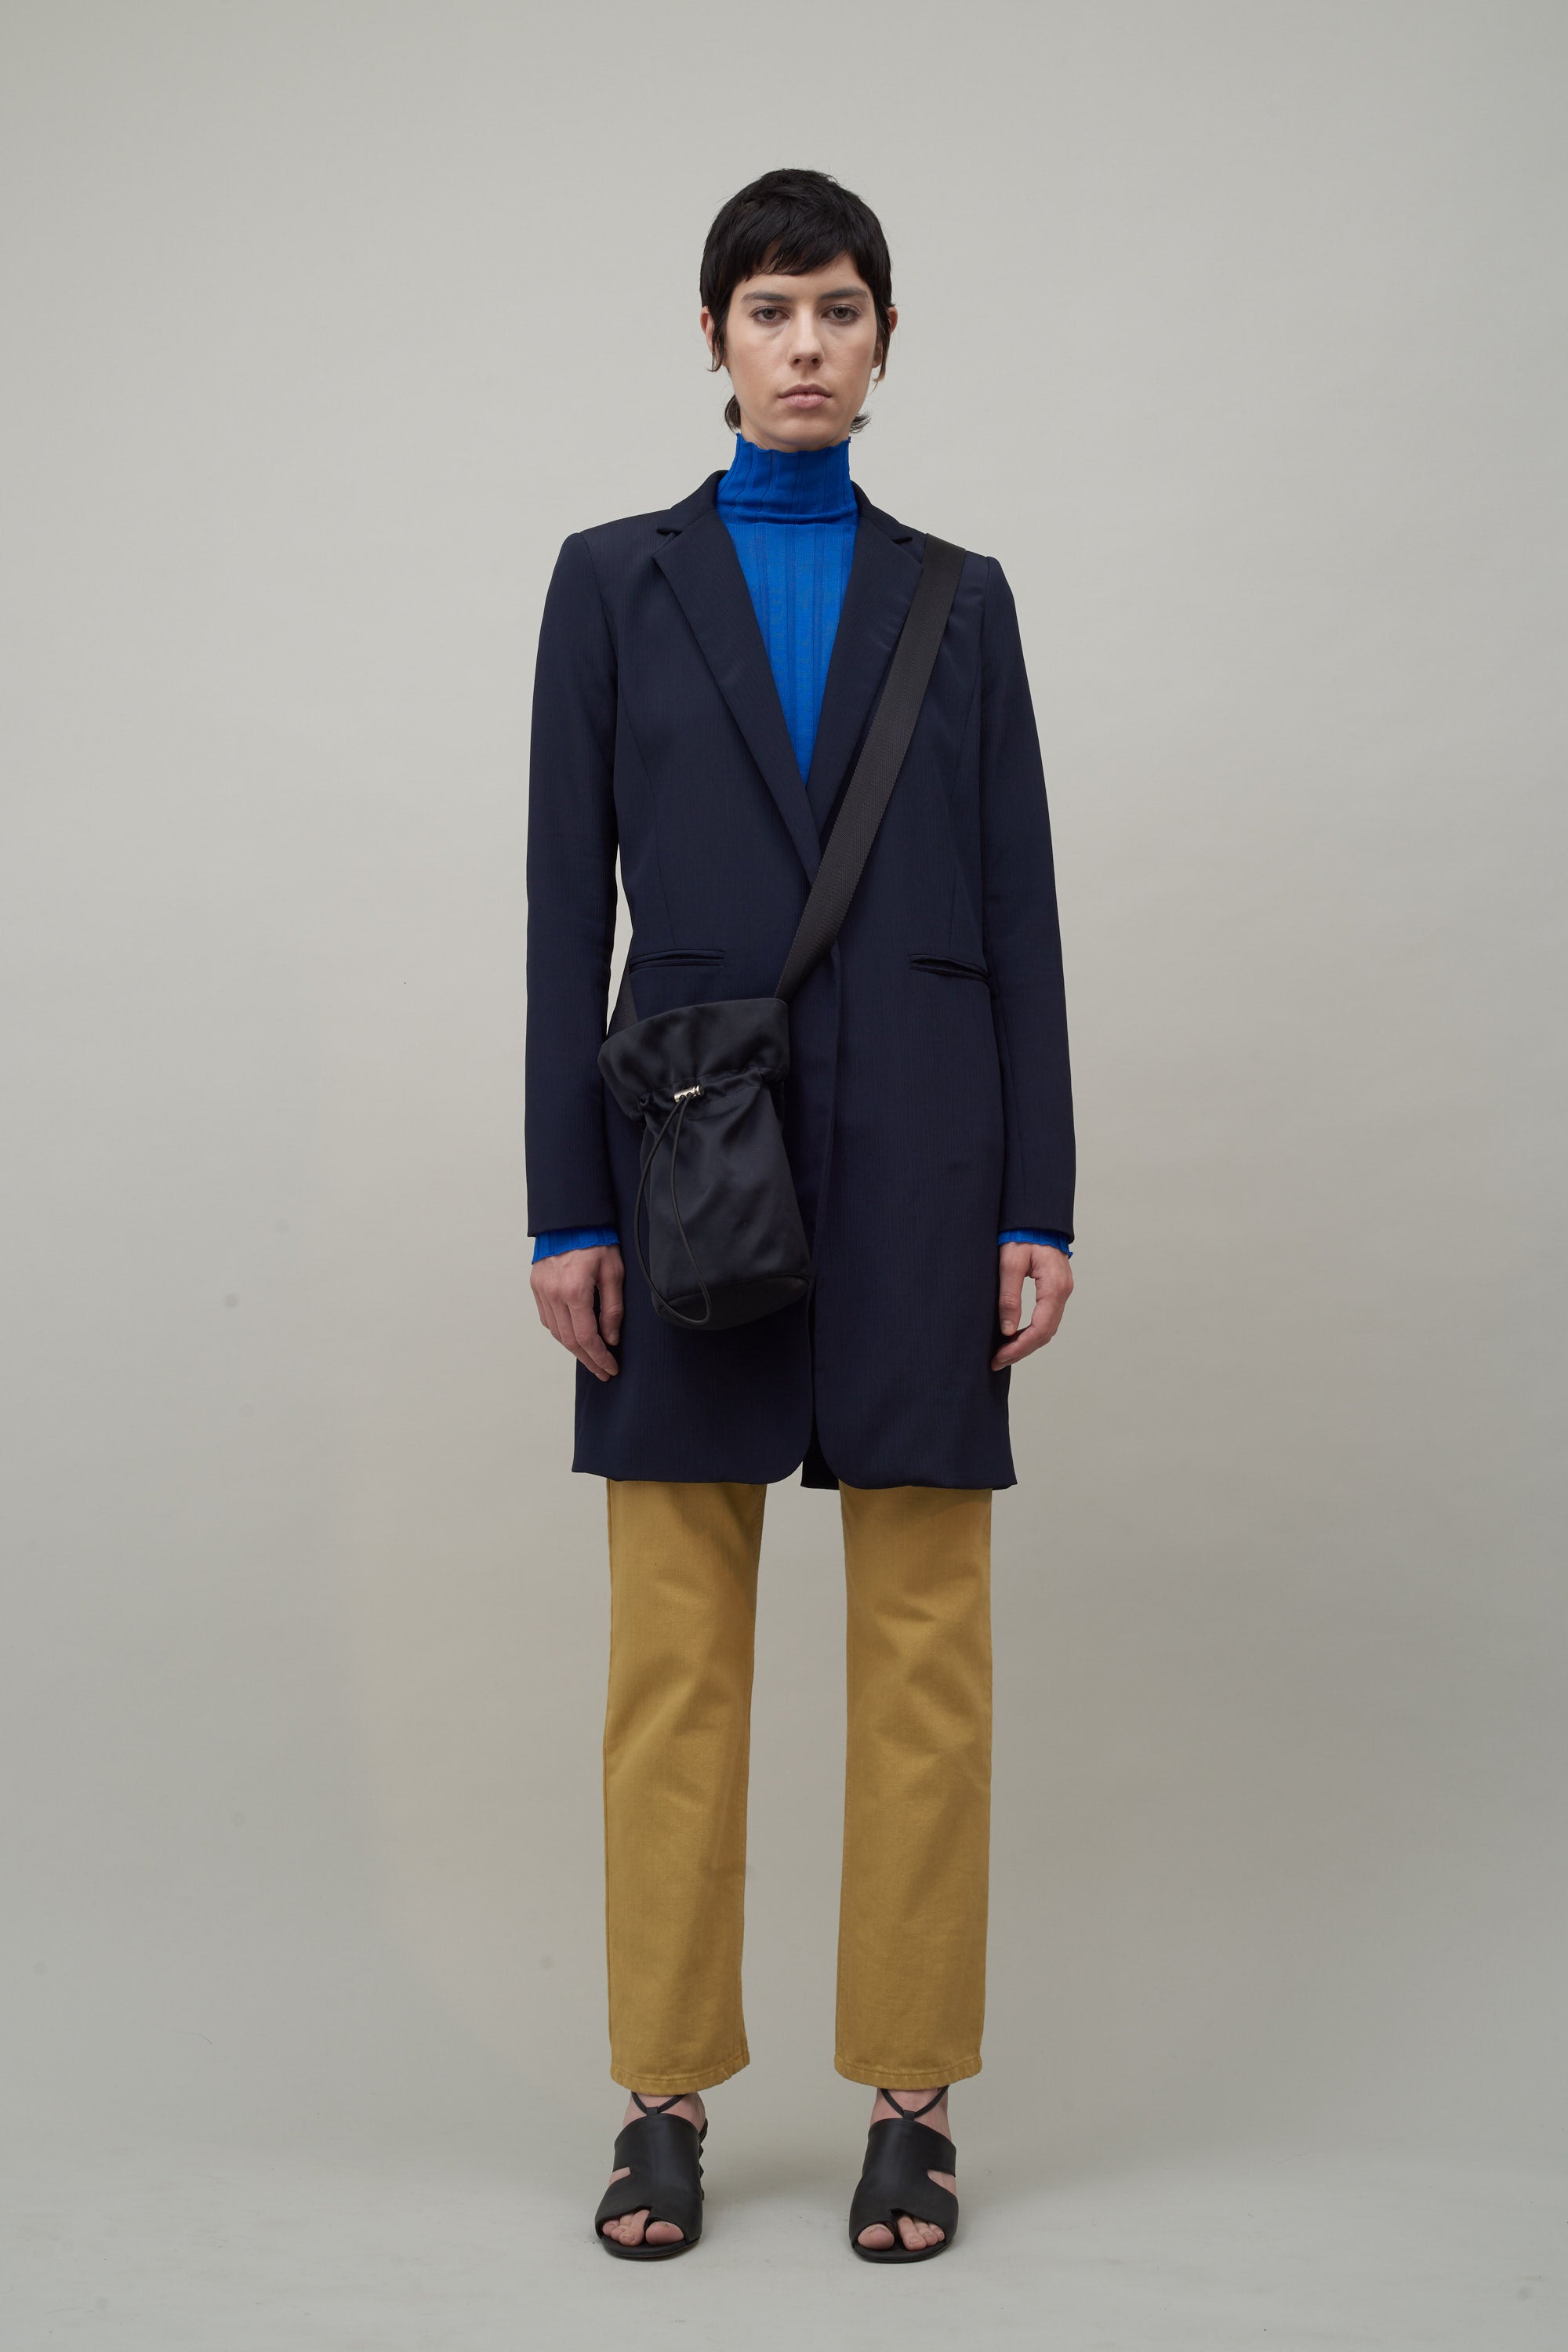 Tie-dye jeans and retro tailoring give Martine Rose's menswear a